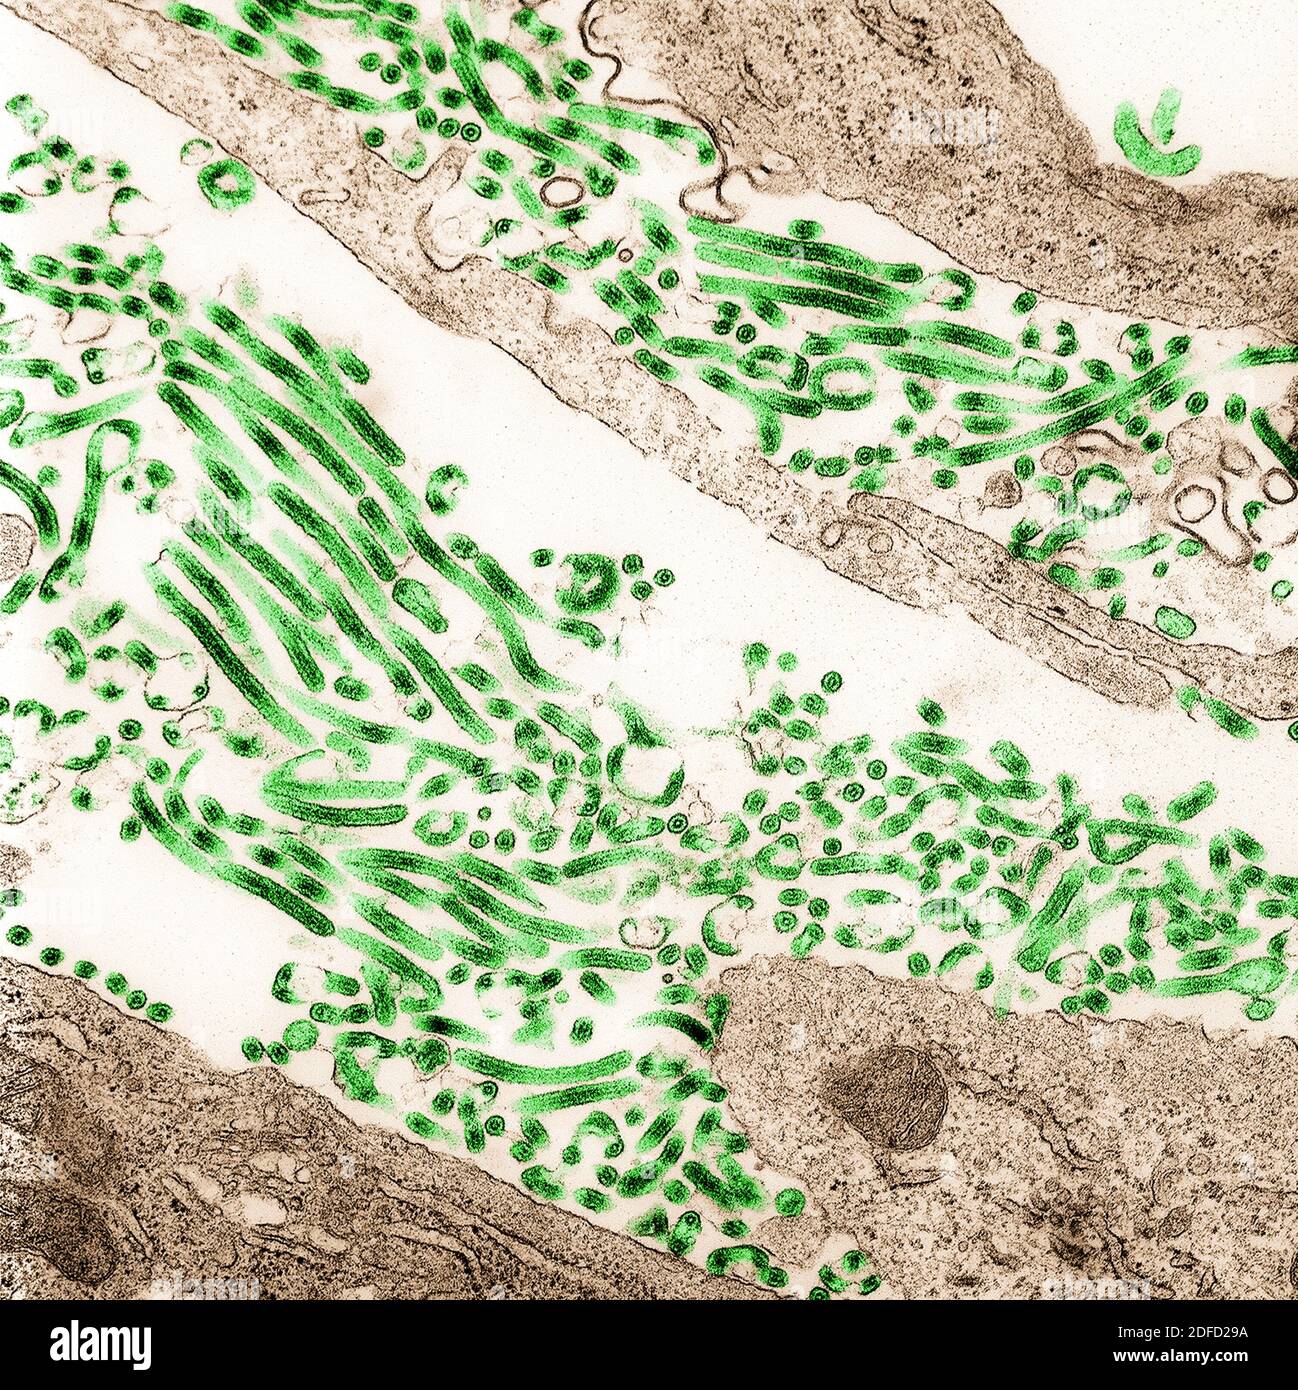 Colorized transmission electron micrograph of Ebola virus particles (green) found both as extracellular particles and budding particles from chronical Stock Photo